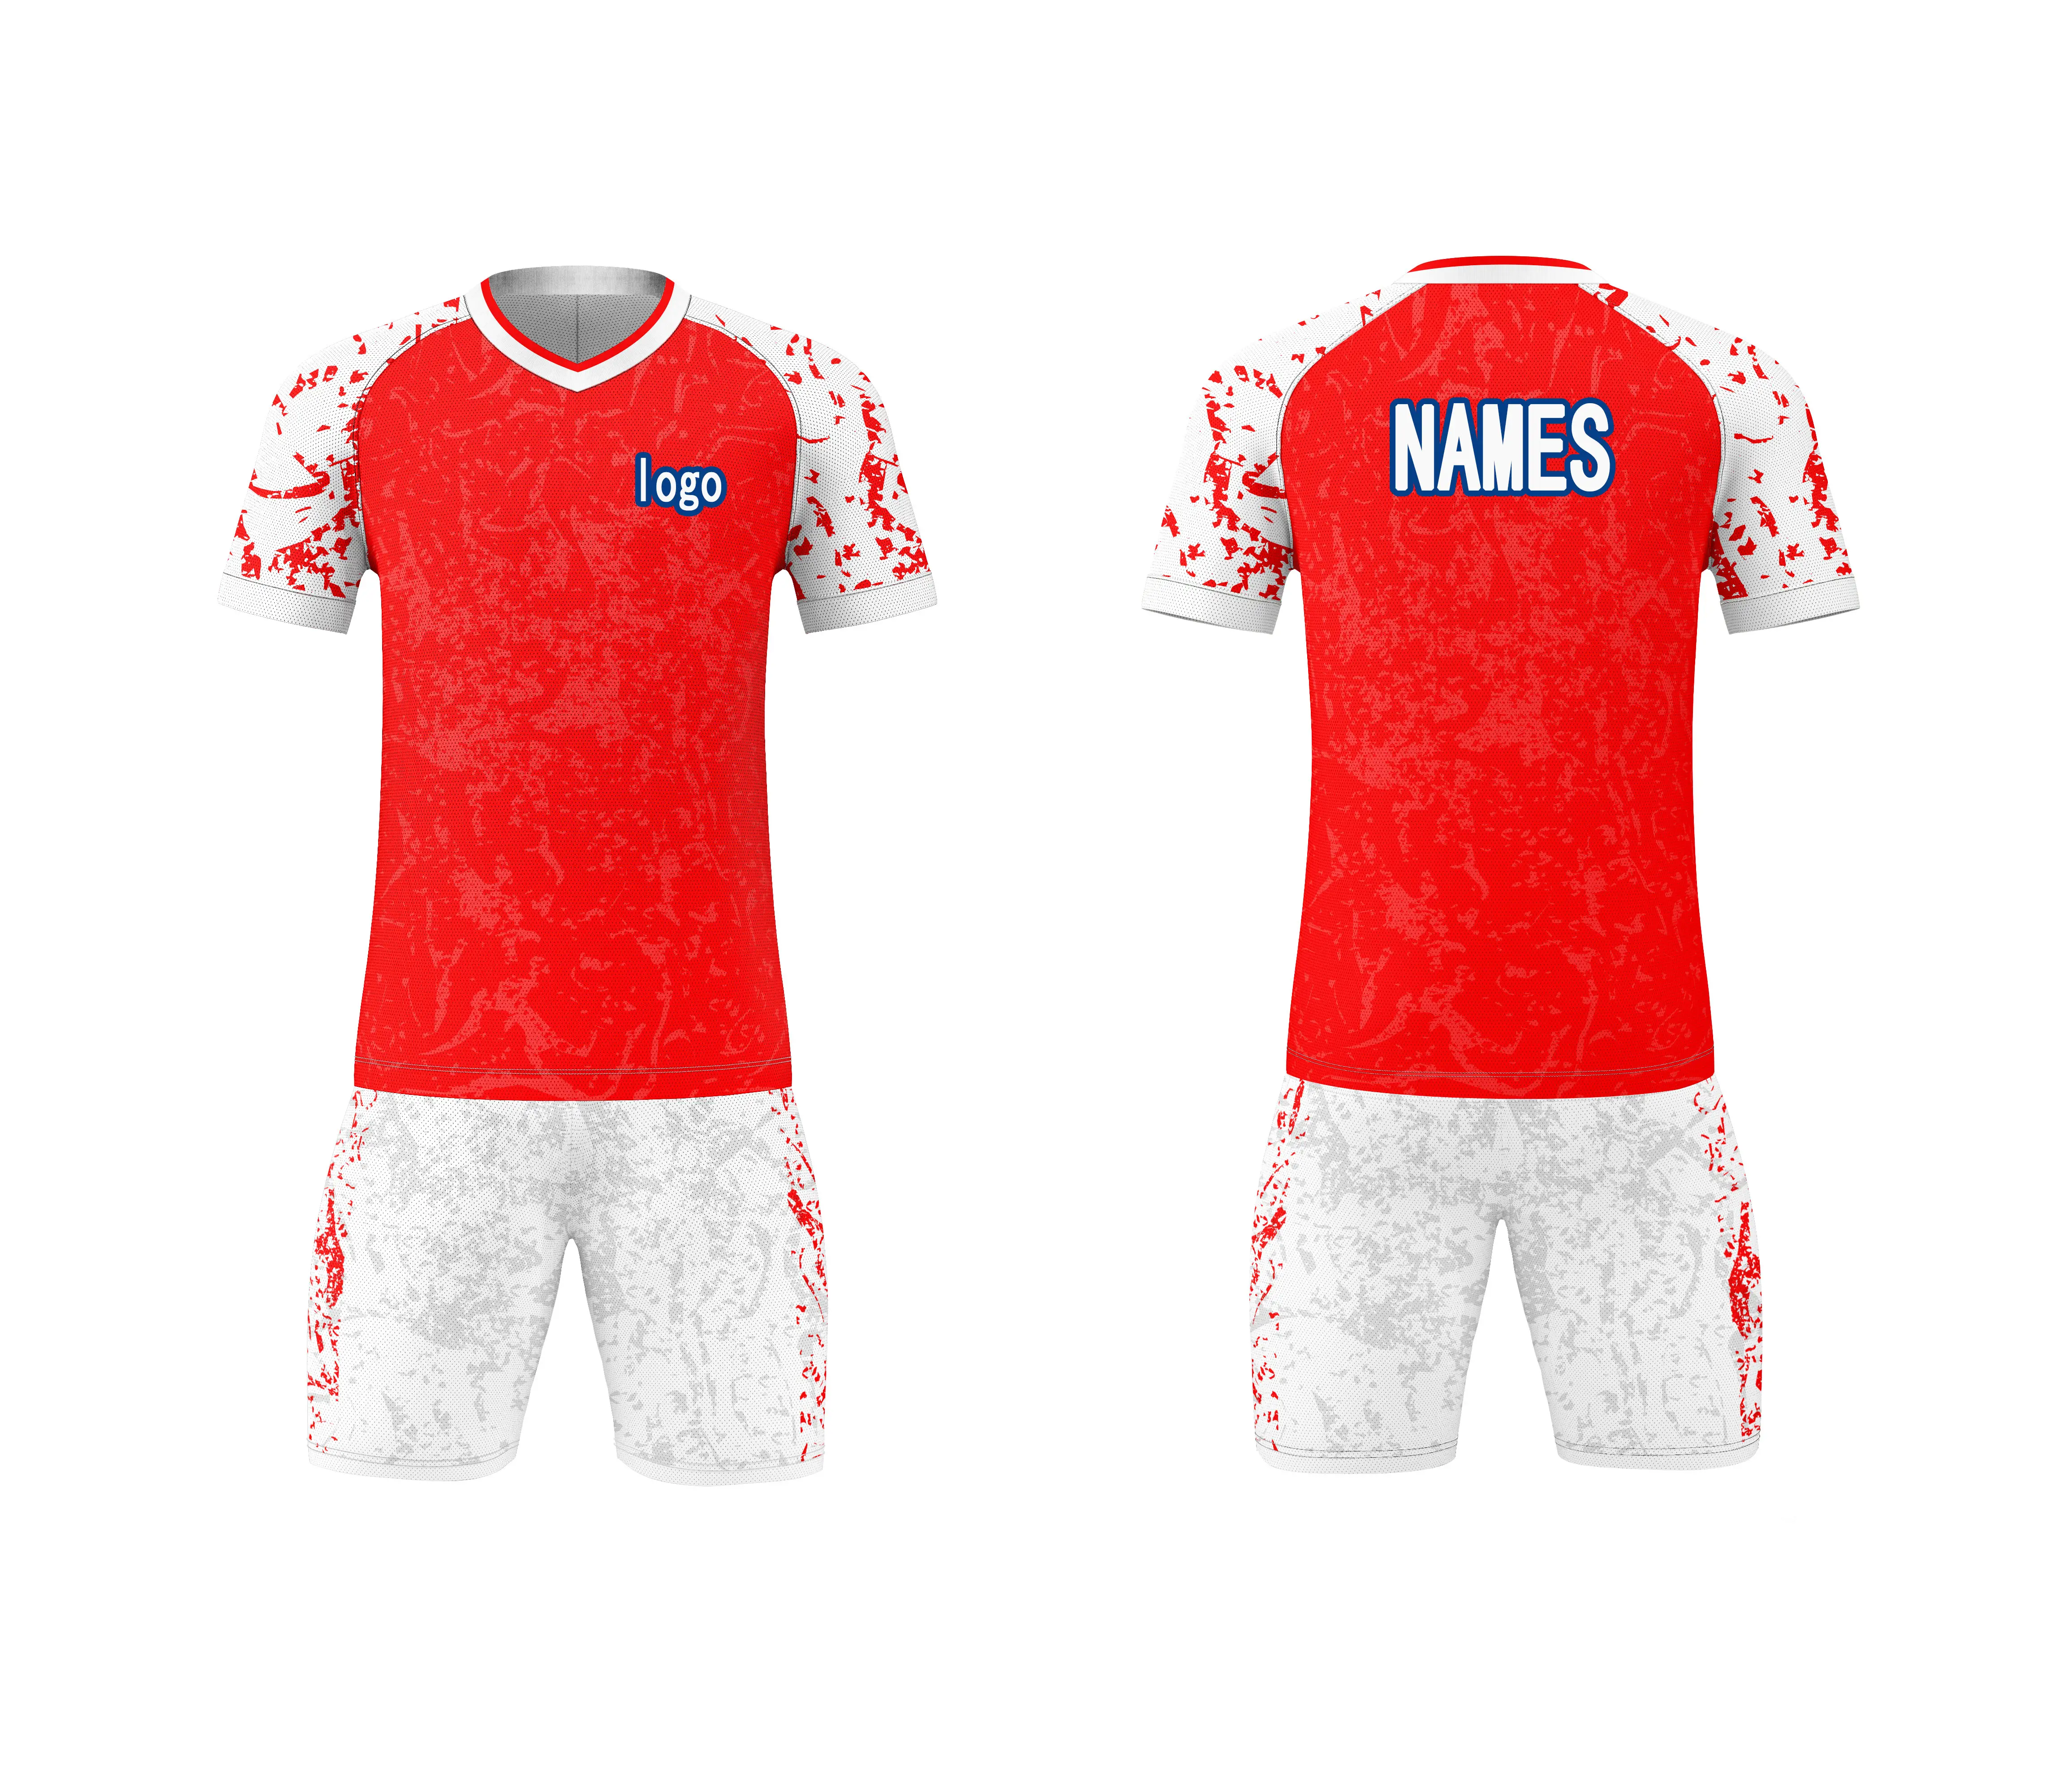 Customised Slim Fit Quick Dry Polyester Retro Football Jerseys Complete Soccer Wear Kits Includes Jersey and Uniforms